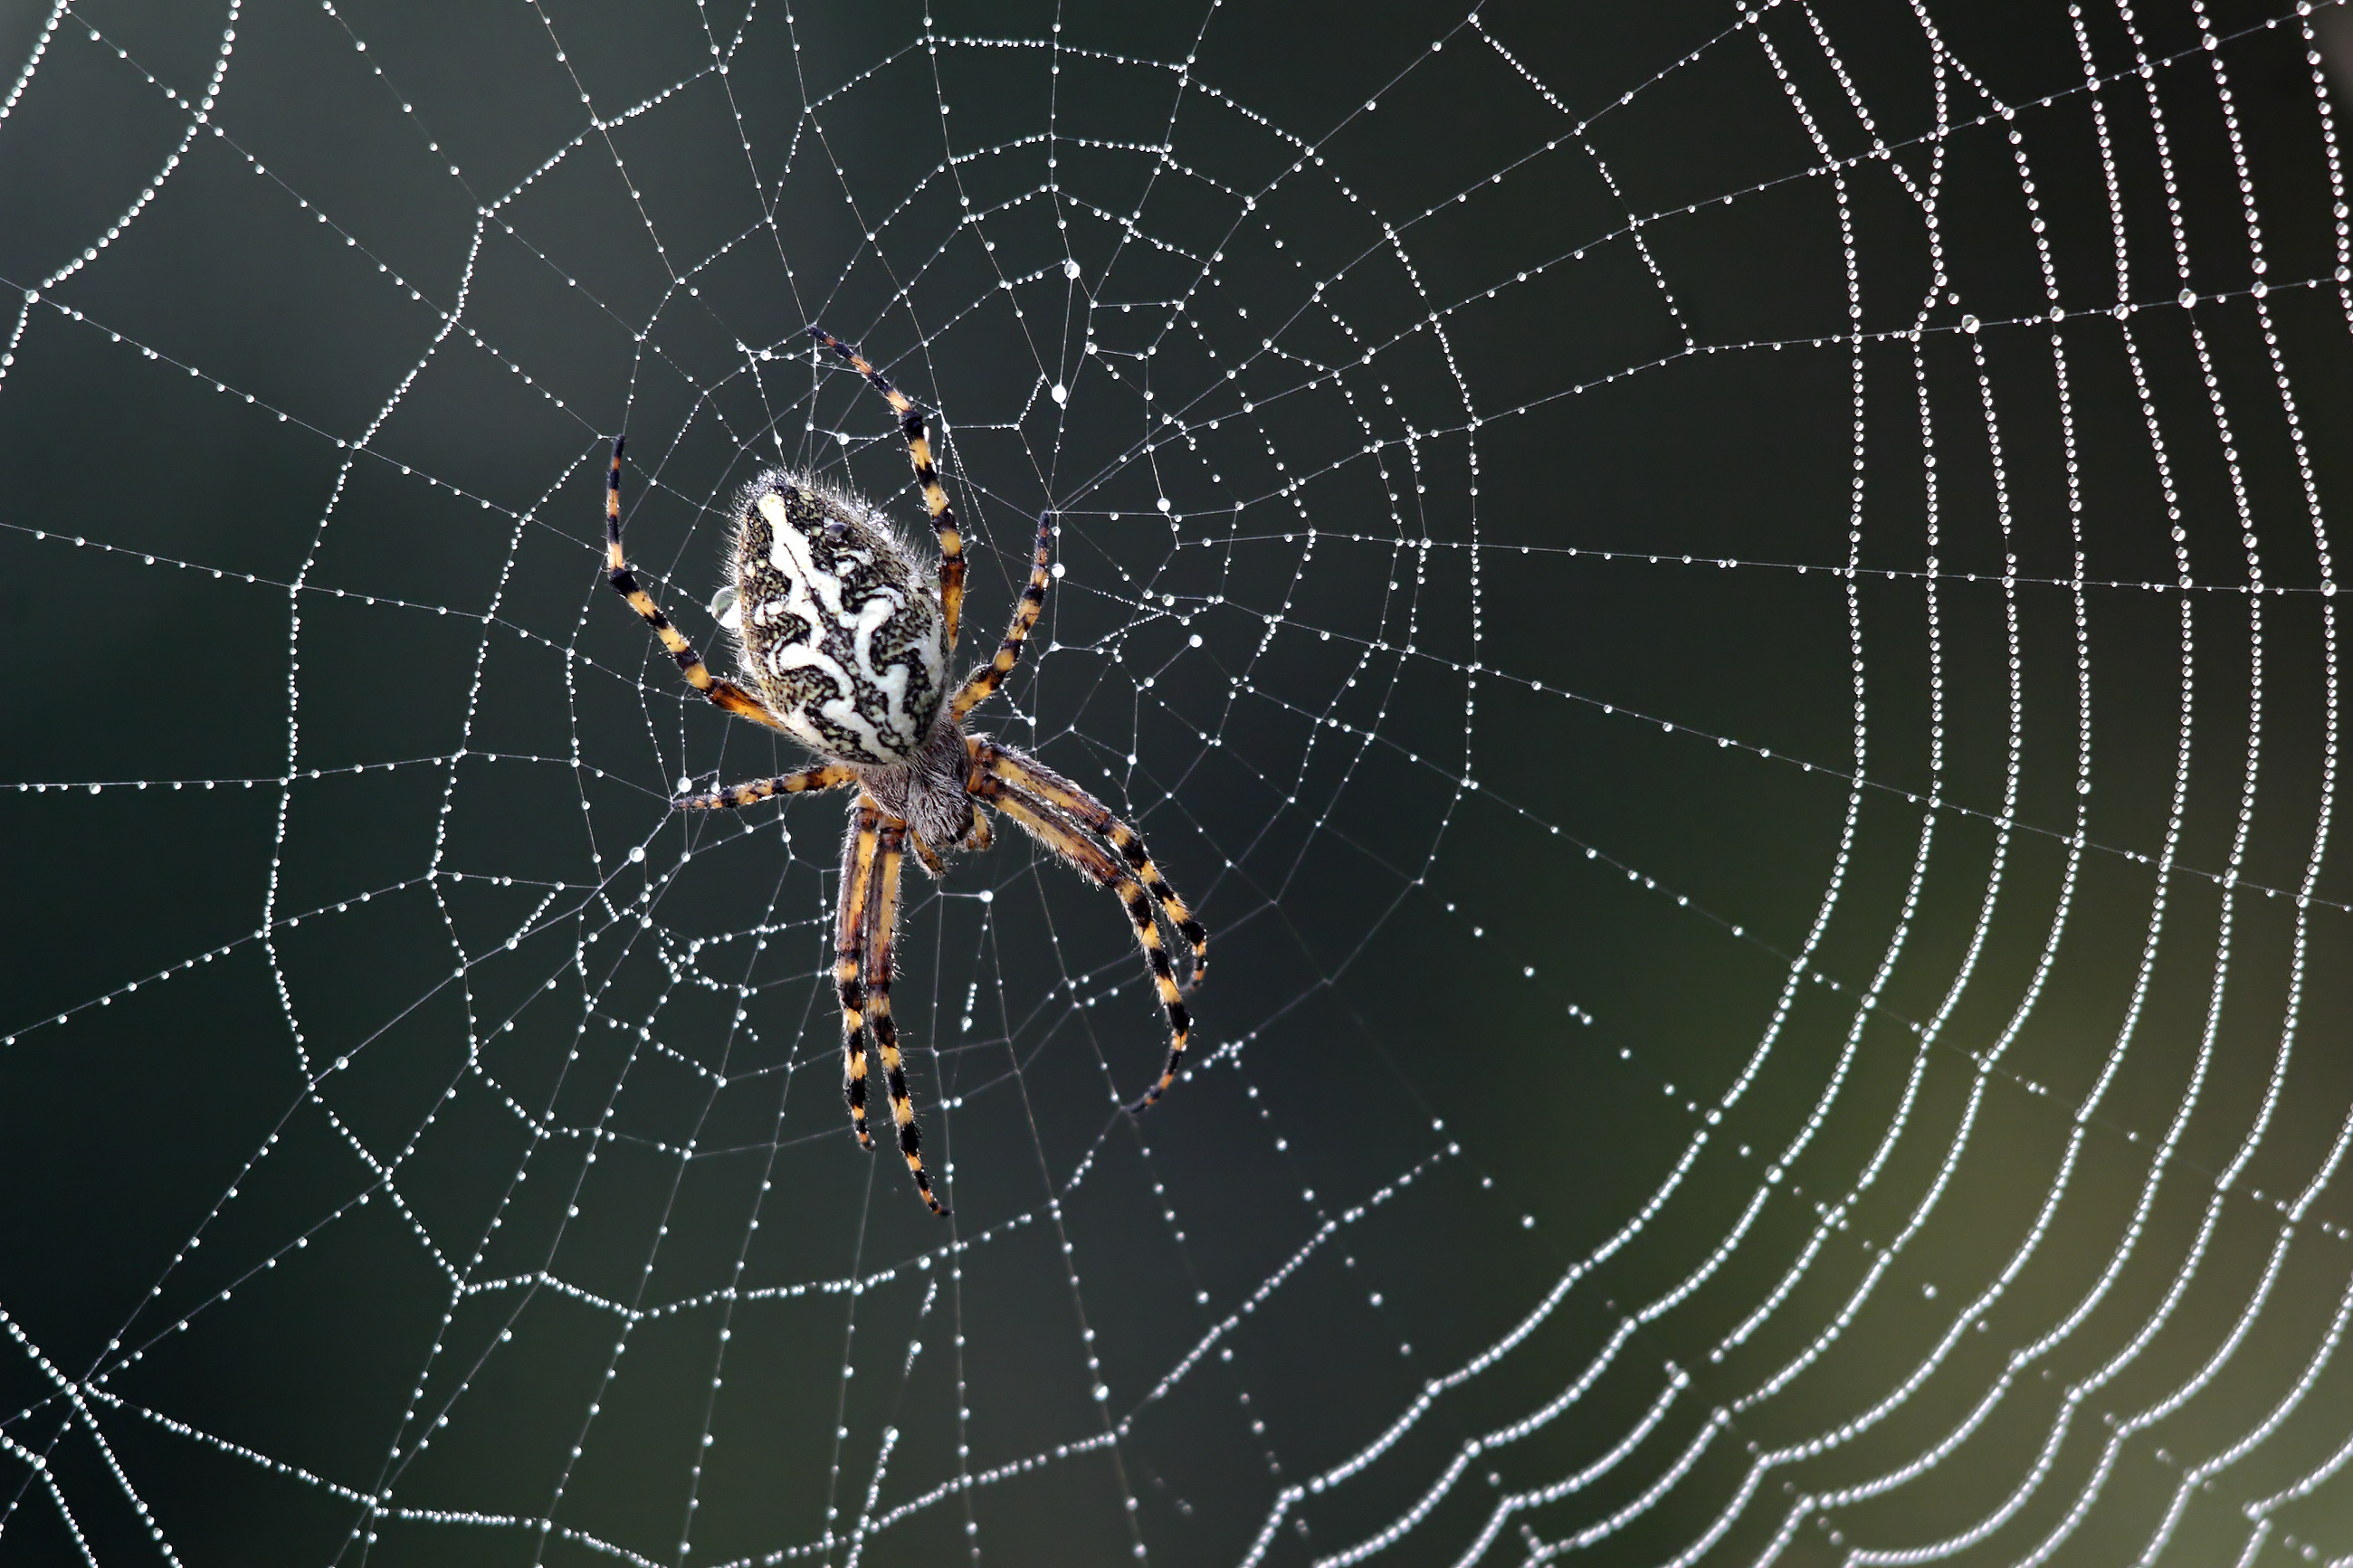 spider in web